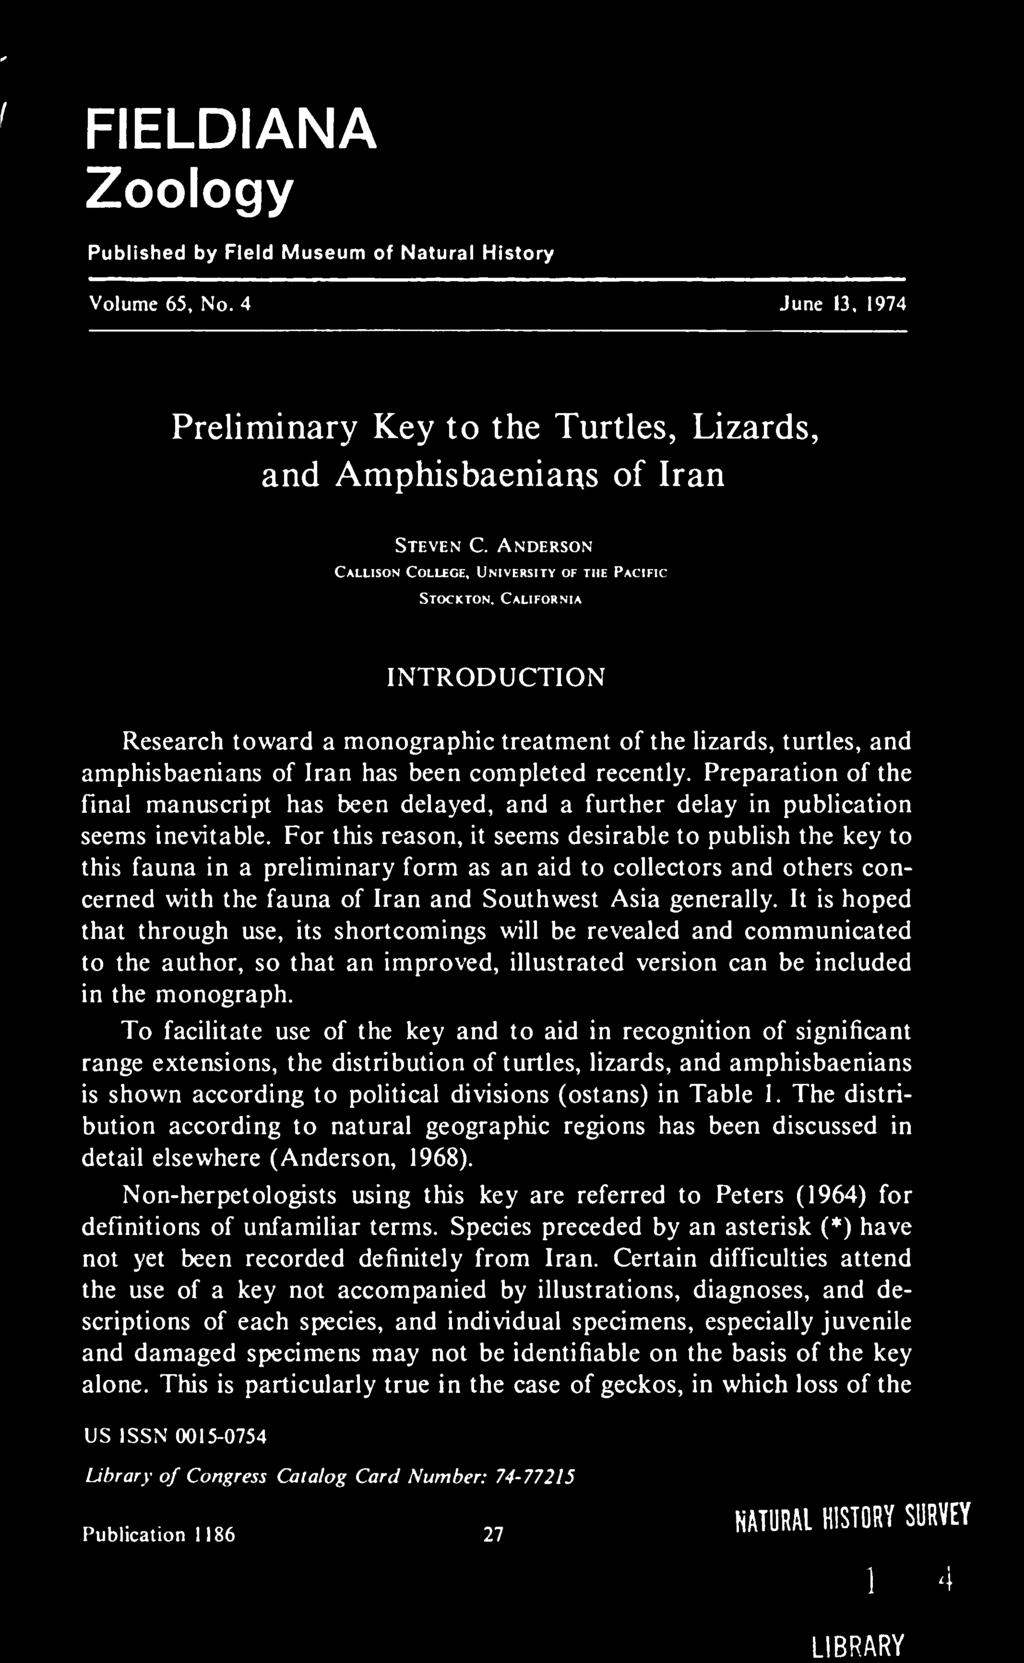 For this reason, it seems desirable to publish the key to this fauna in a preliminary form as an aid to collectors and others concerned with the fauna of Iran and Southwest Asia generally.